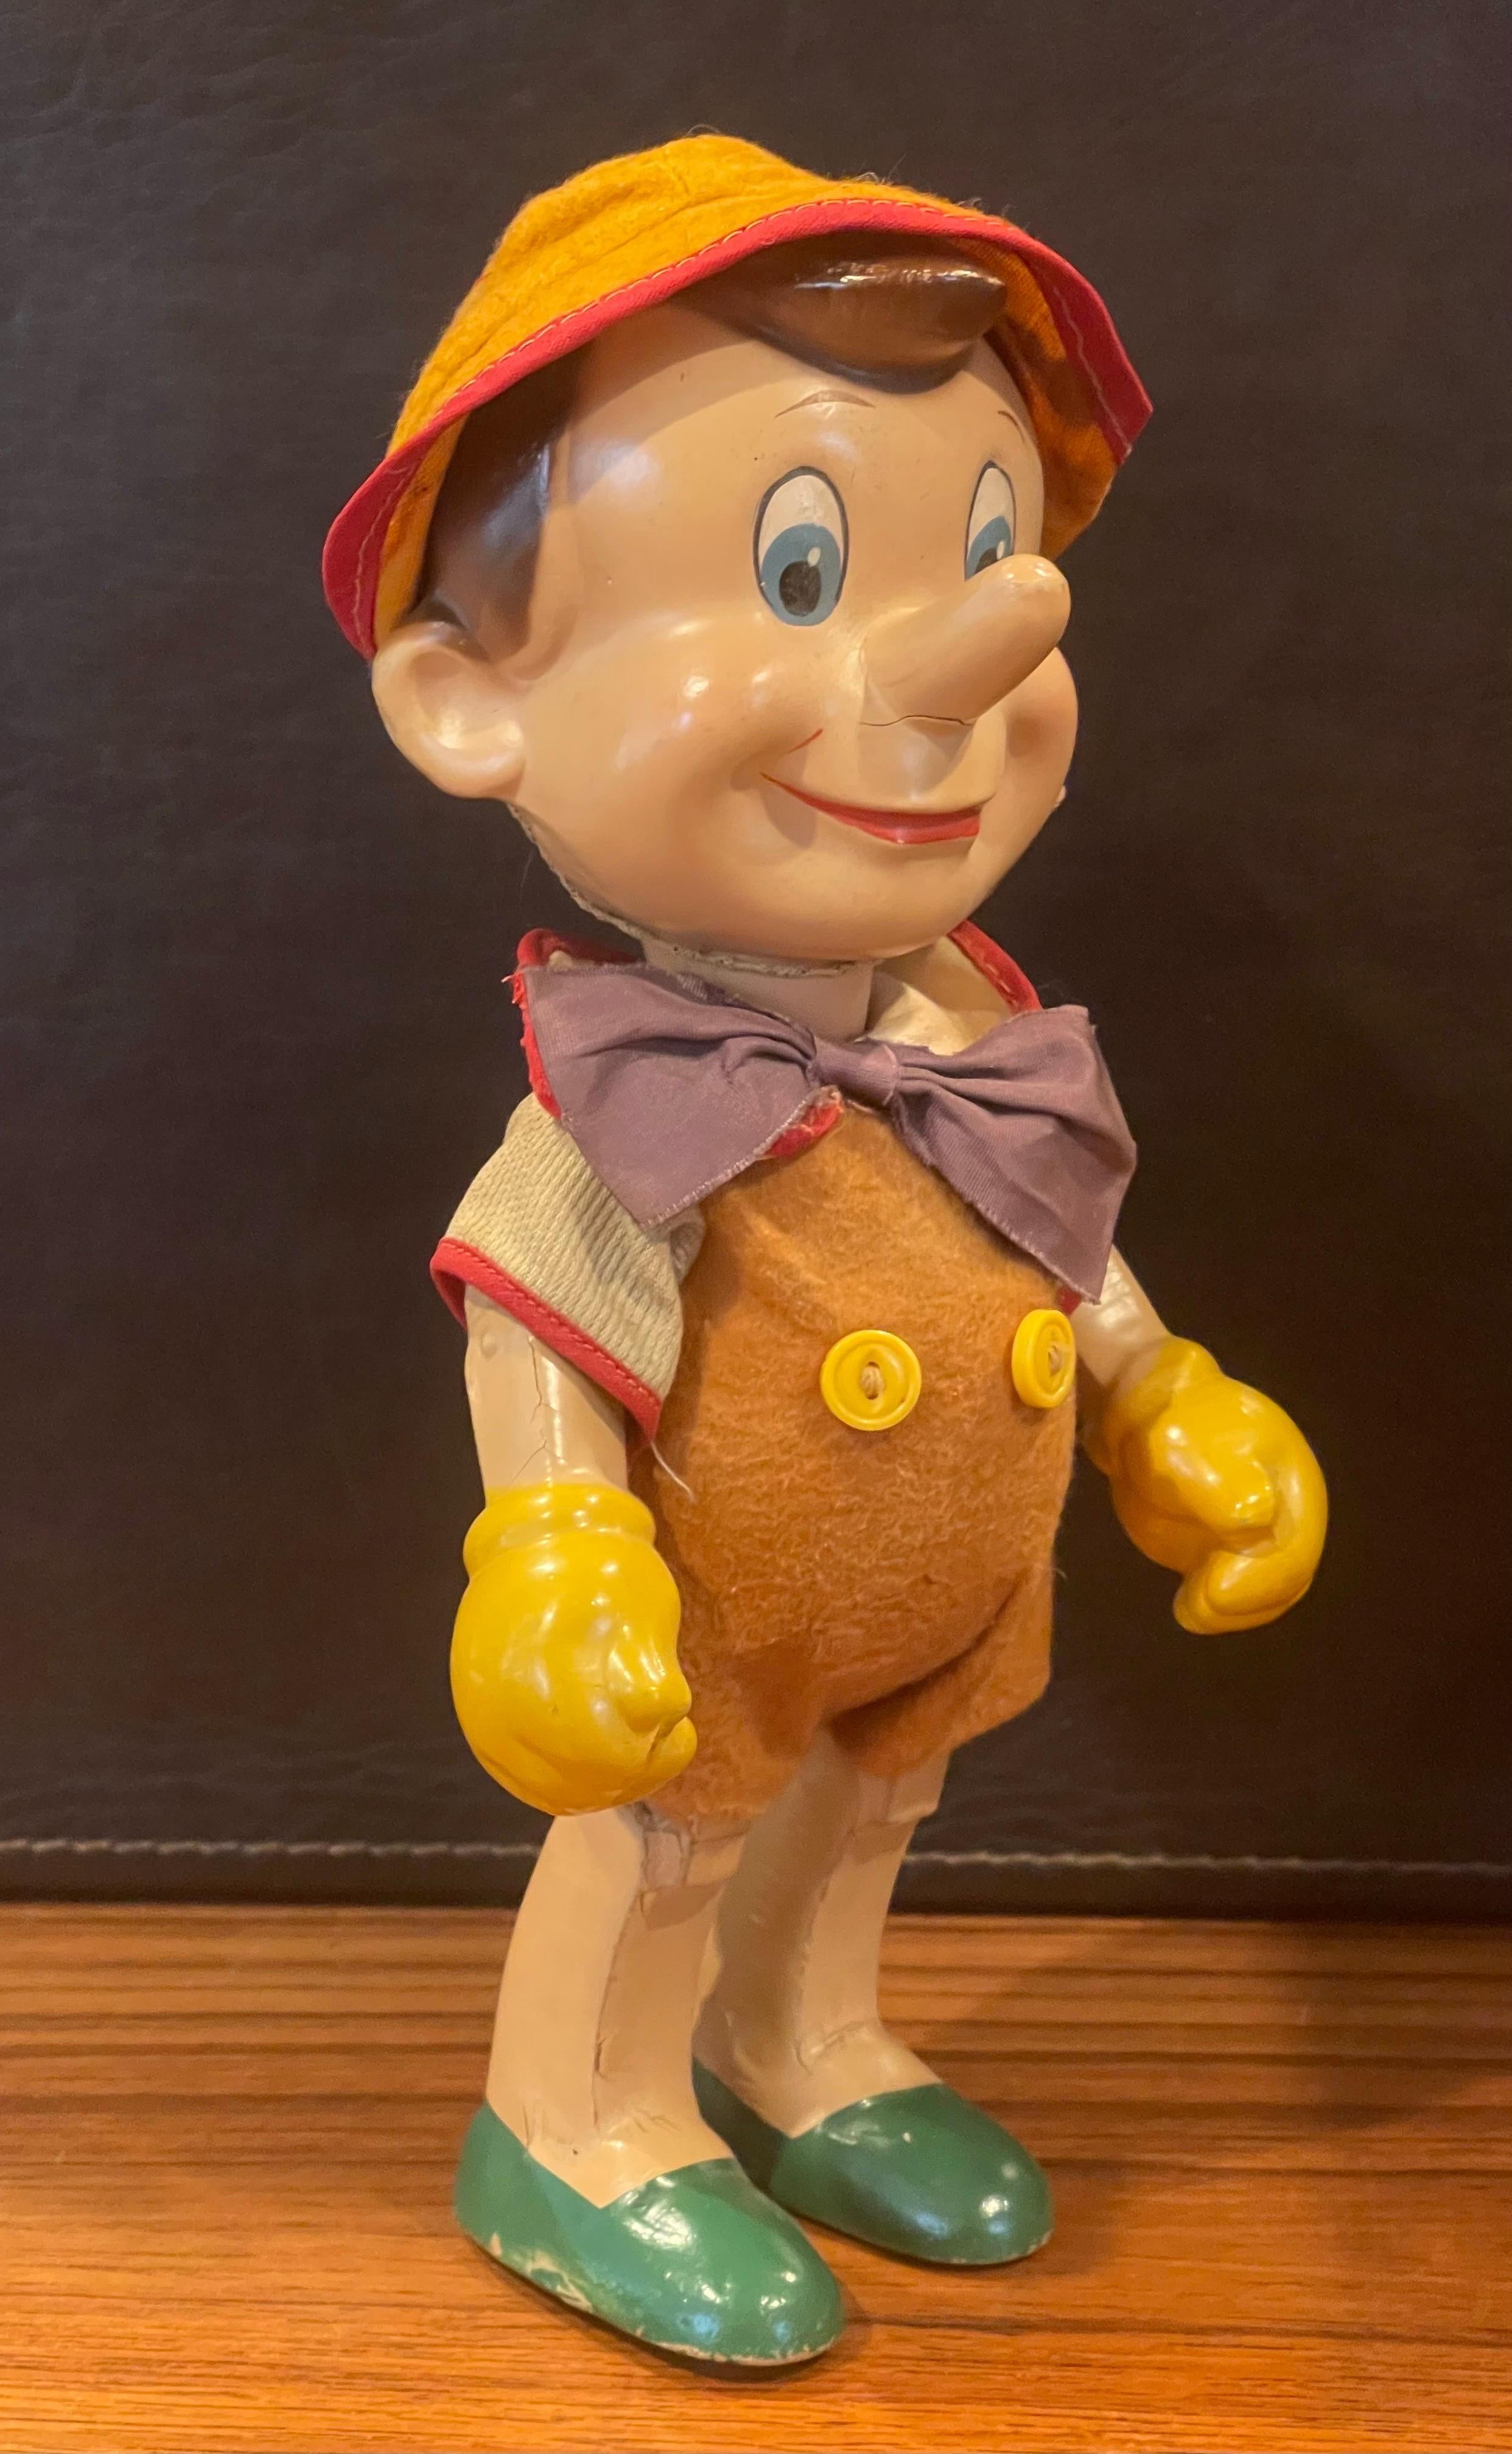 20th Century Antique Pinocchio Doll by Knickerbocker Toy Co. For Sale